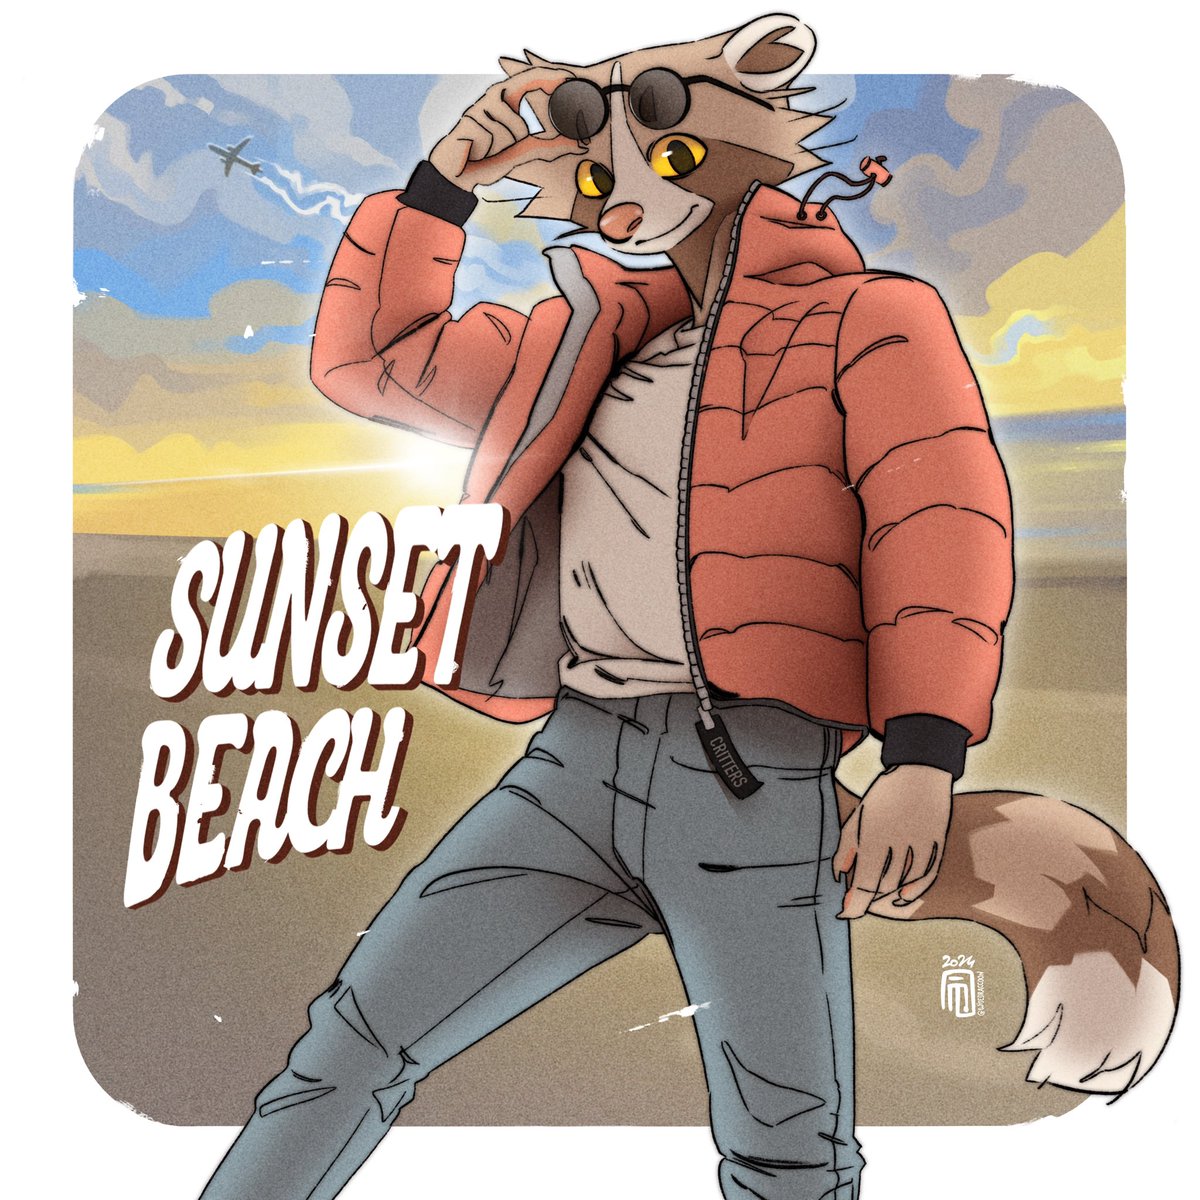 A raccoon at sunset beach. A postcard-worthy setting in a retro-chic ambiance for a moment of sweetness and nostalgia. 🌅✨ #illustration #raccoonart #furryart #raccoon #vintageart #retrostyle